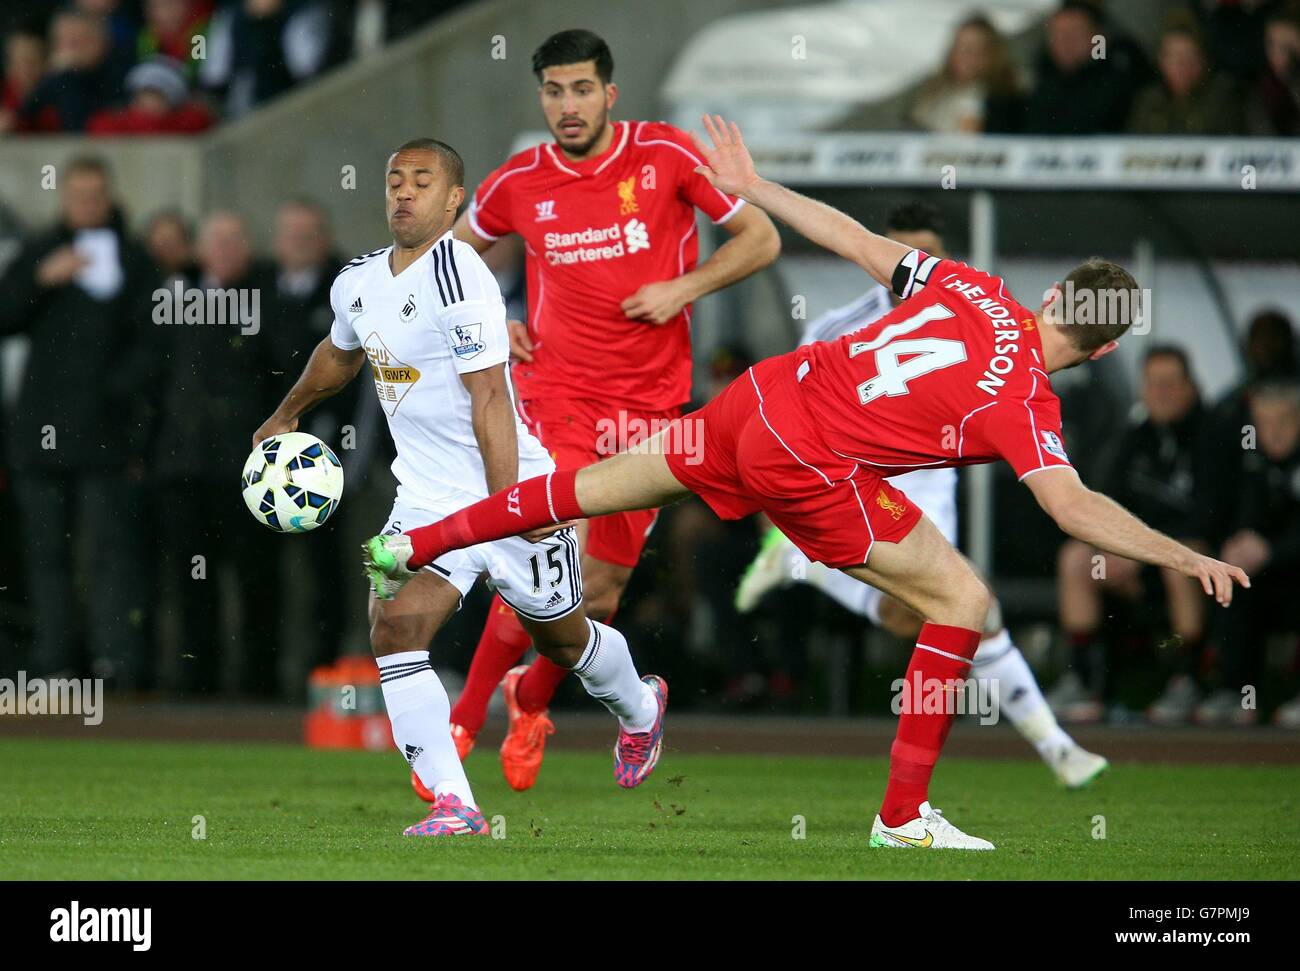 Swansea City's Wayne Routledge is tackled by Liverpool's Jordan Henderson during the Barclays Premier League match at the Liberty Stadium, Swansea. Stock Photo